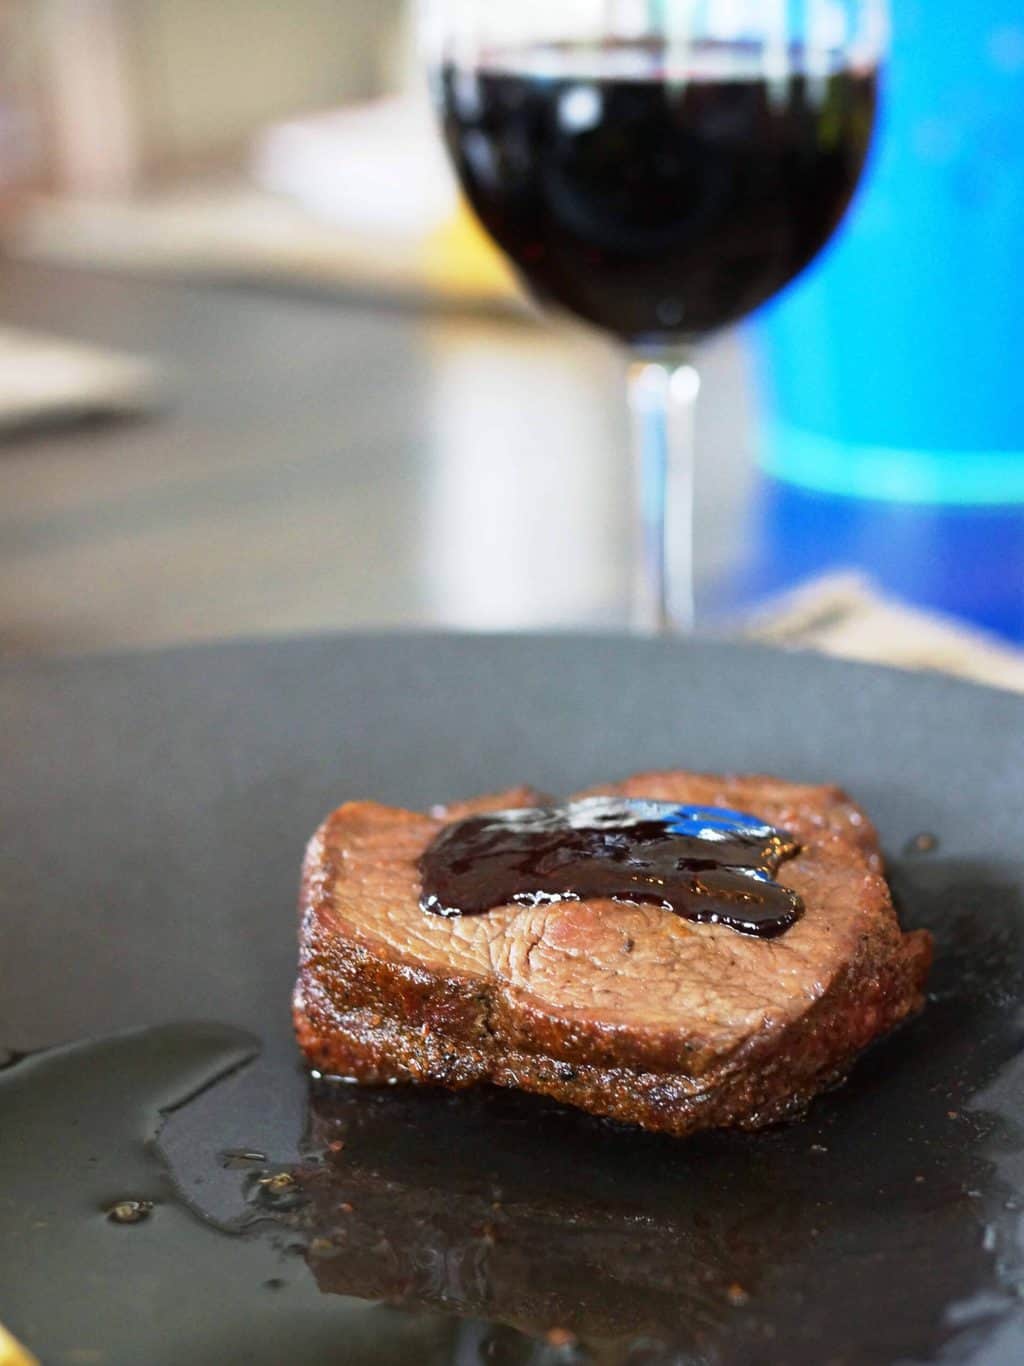 Steak with wine sauce with a glass of red wine.